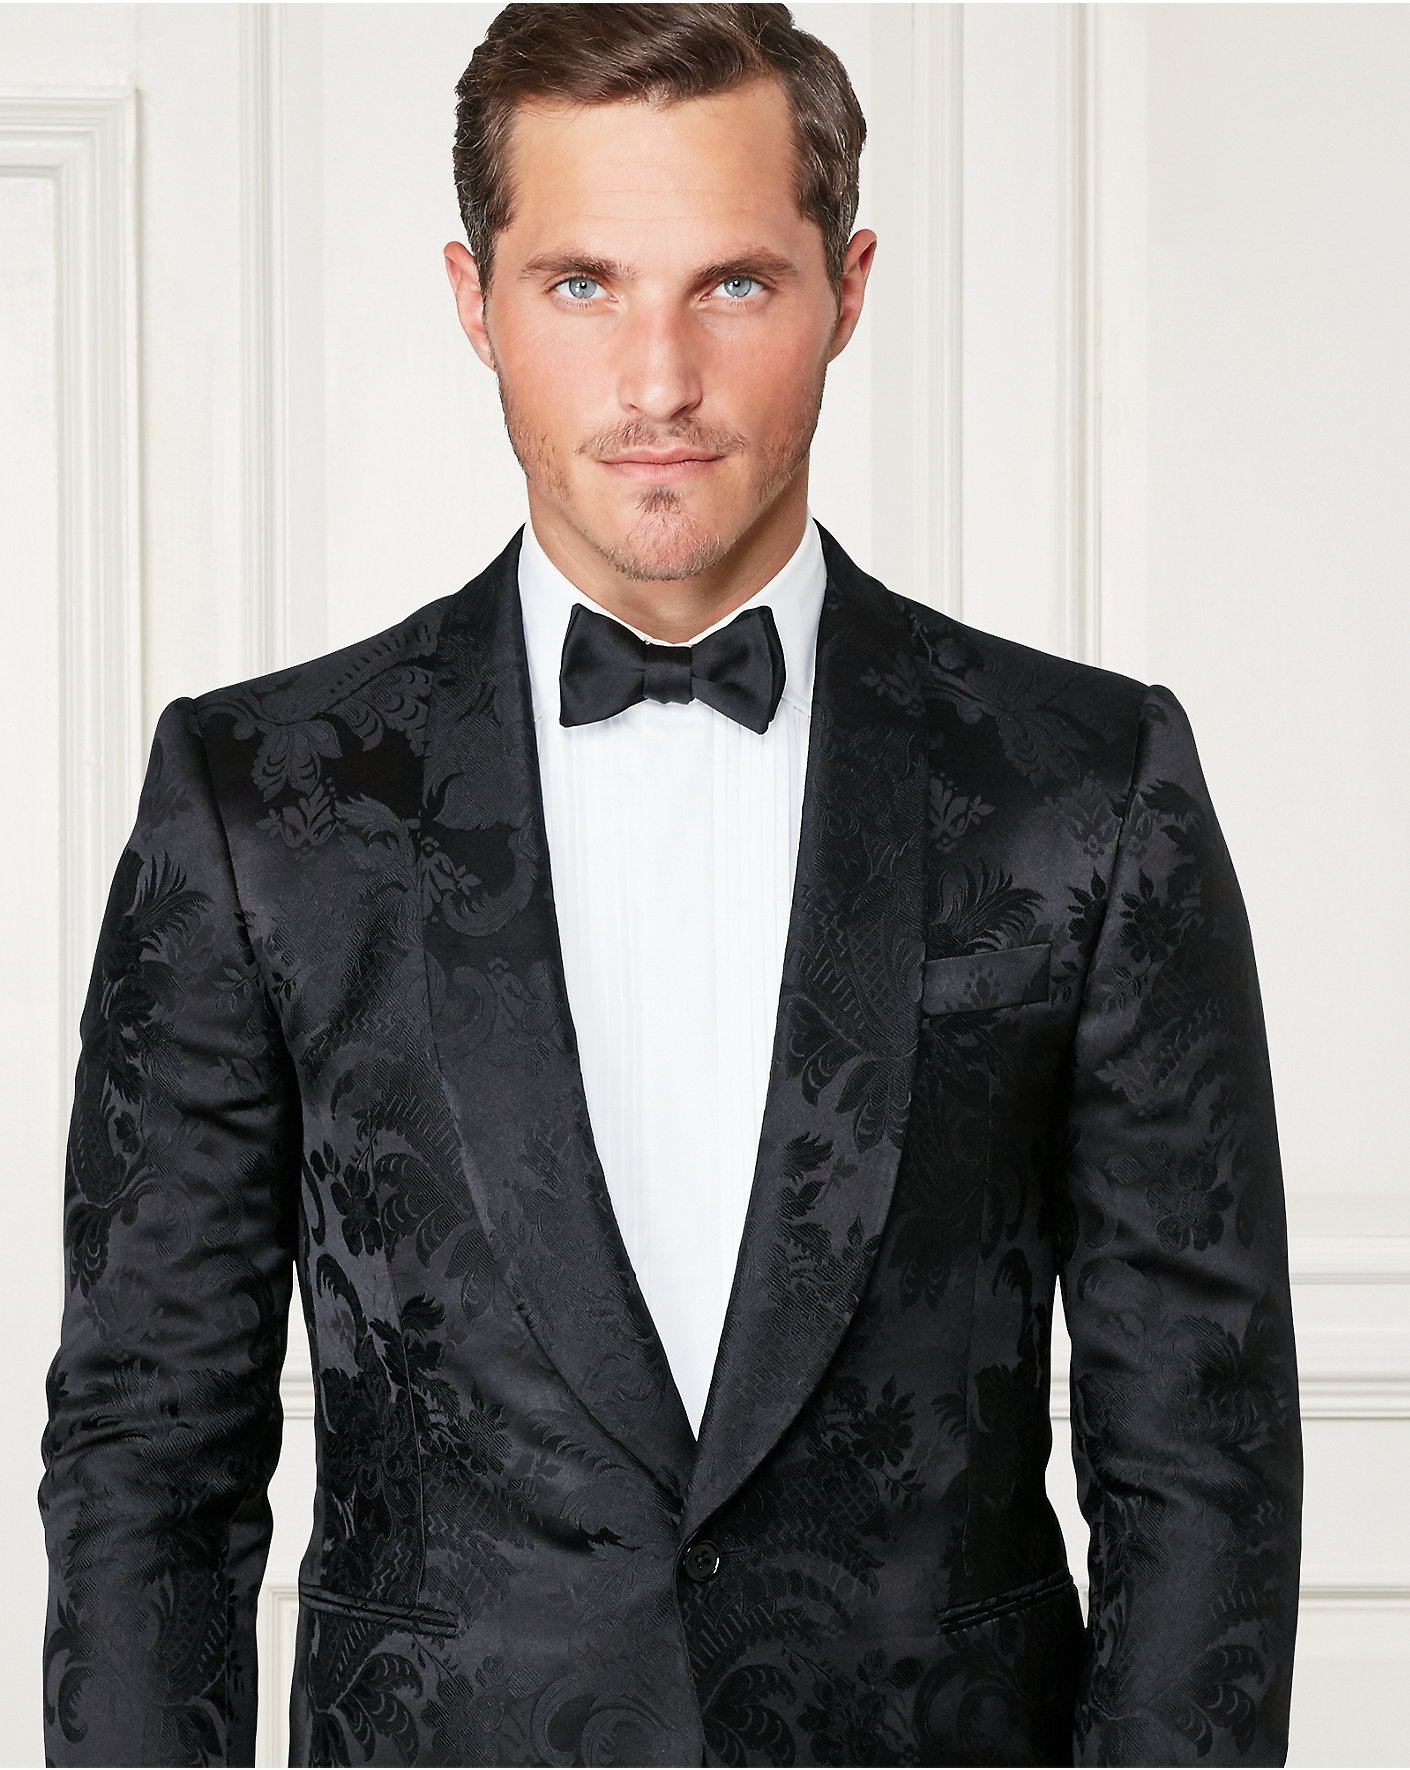 MALE MODELS IN SUITS: Ollie Edwards for Ralph Lauren